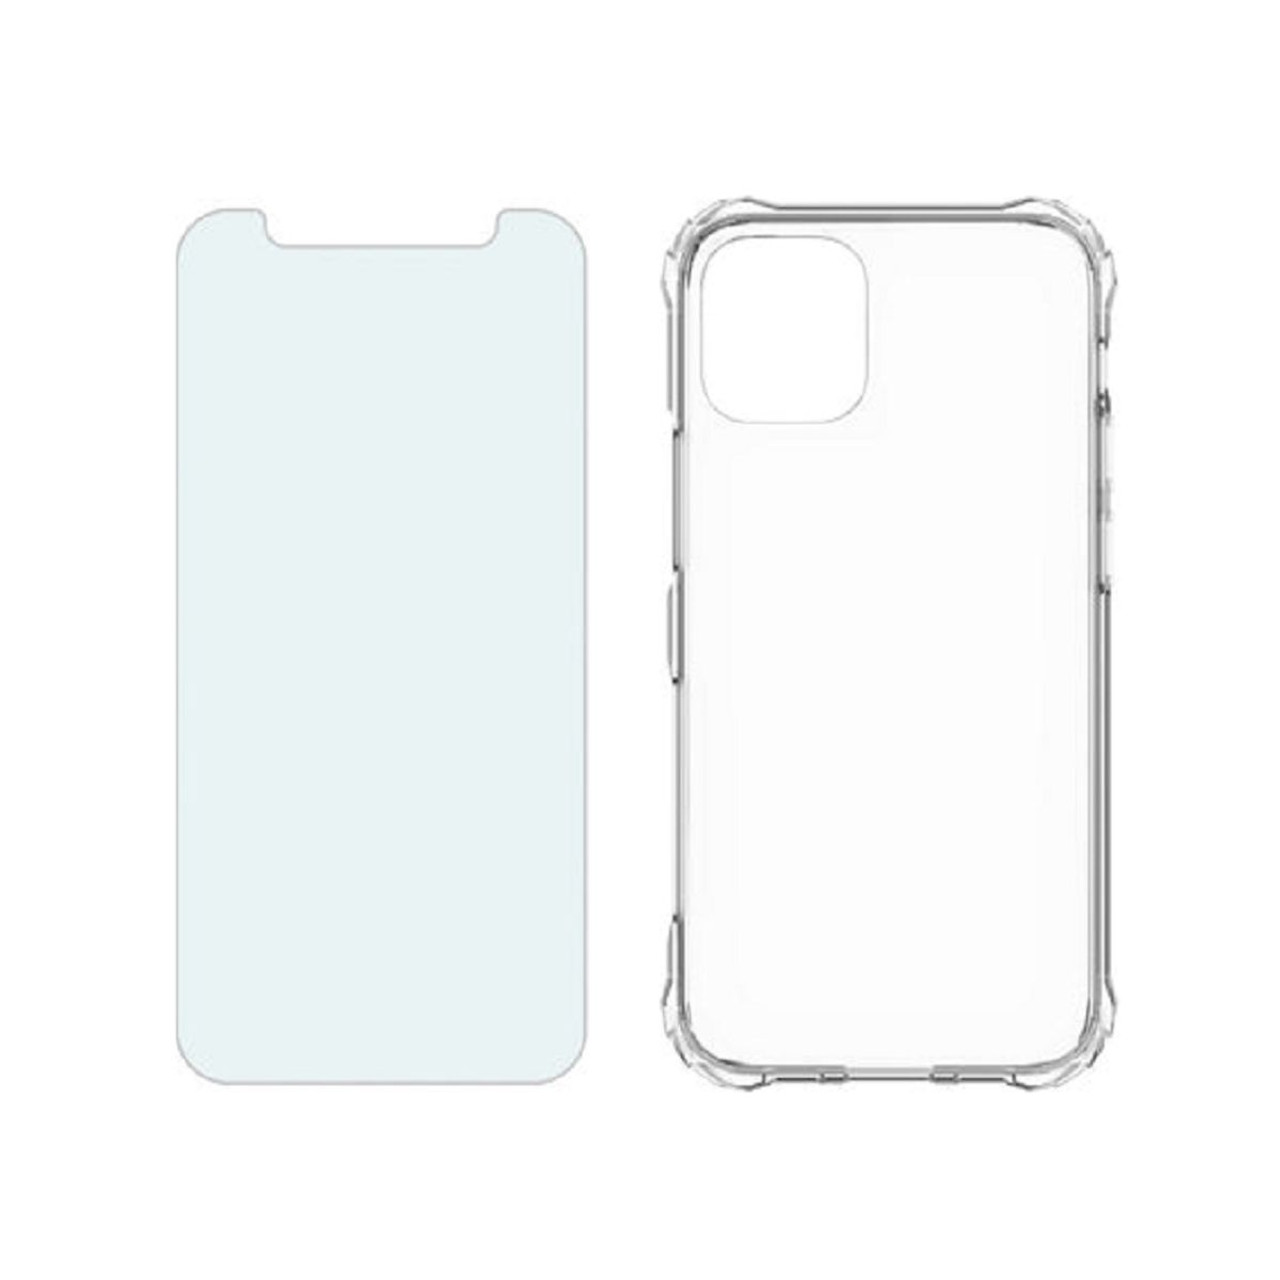 Verizon iPhone 12 mini Case and Blue Light Protector product image